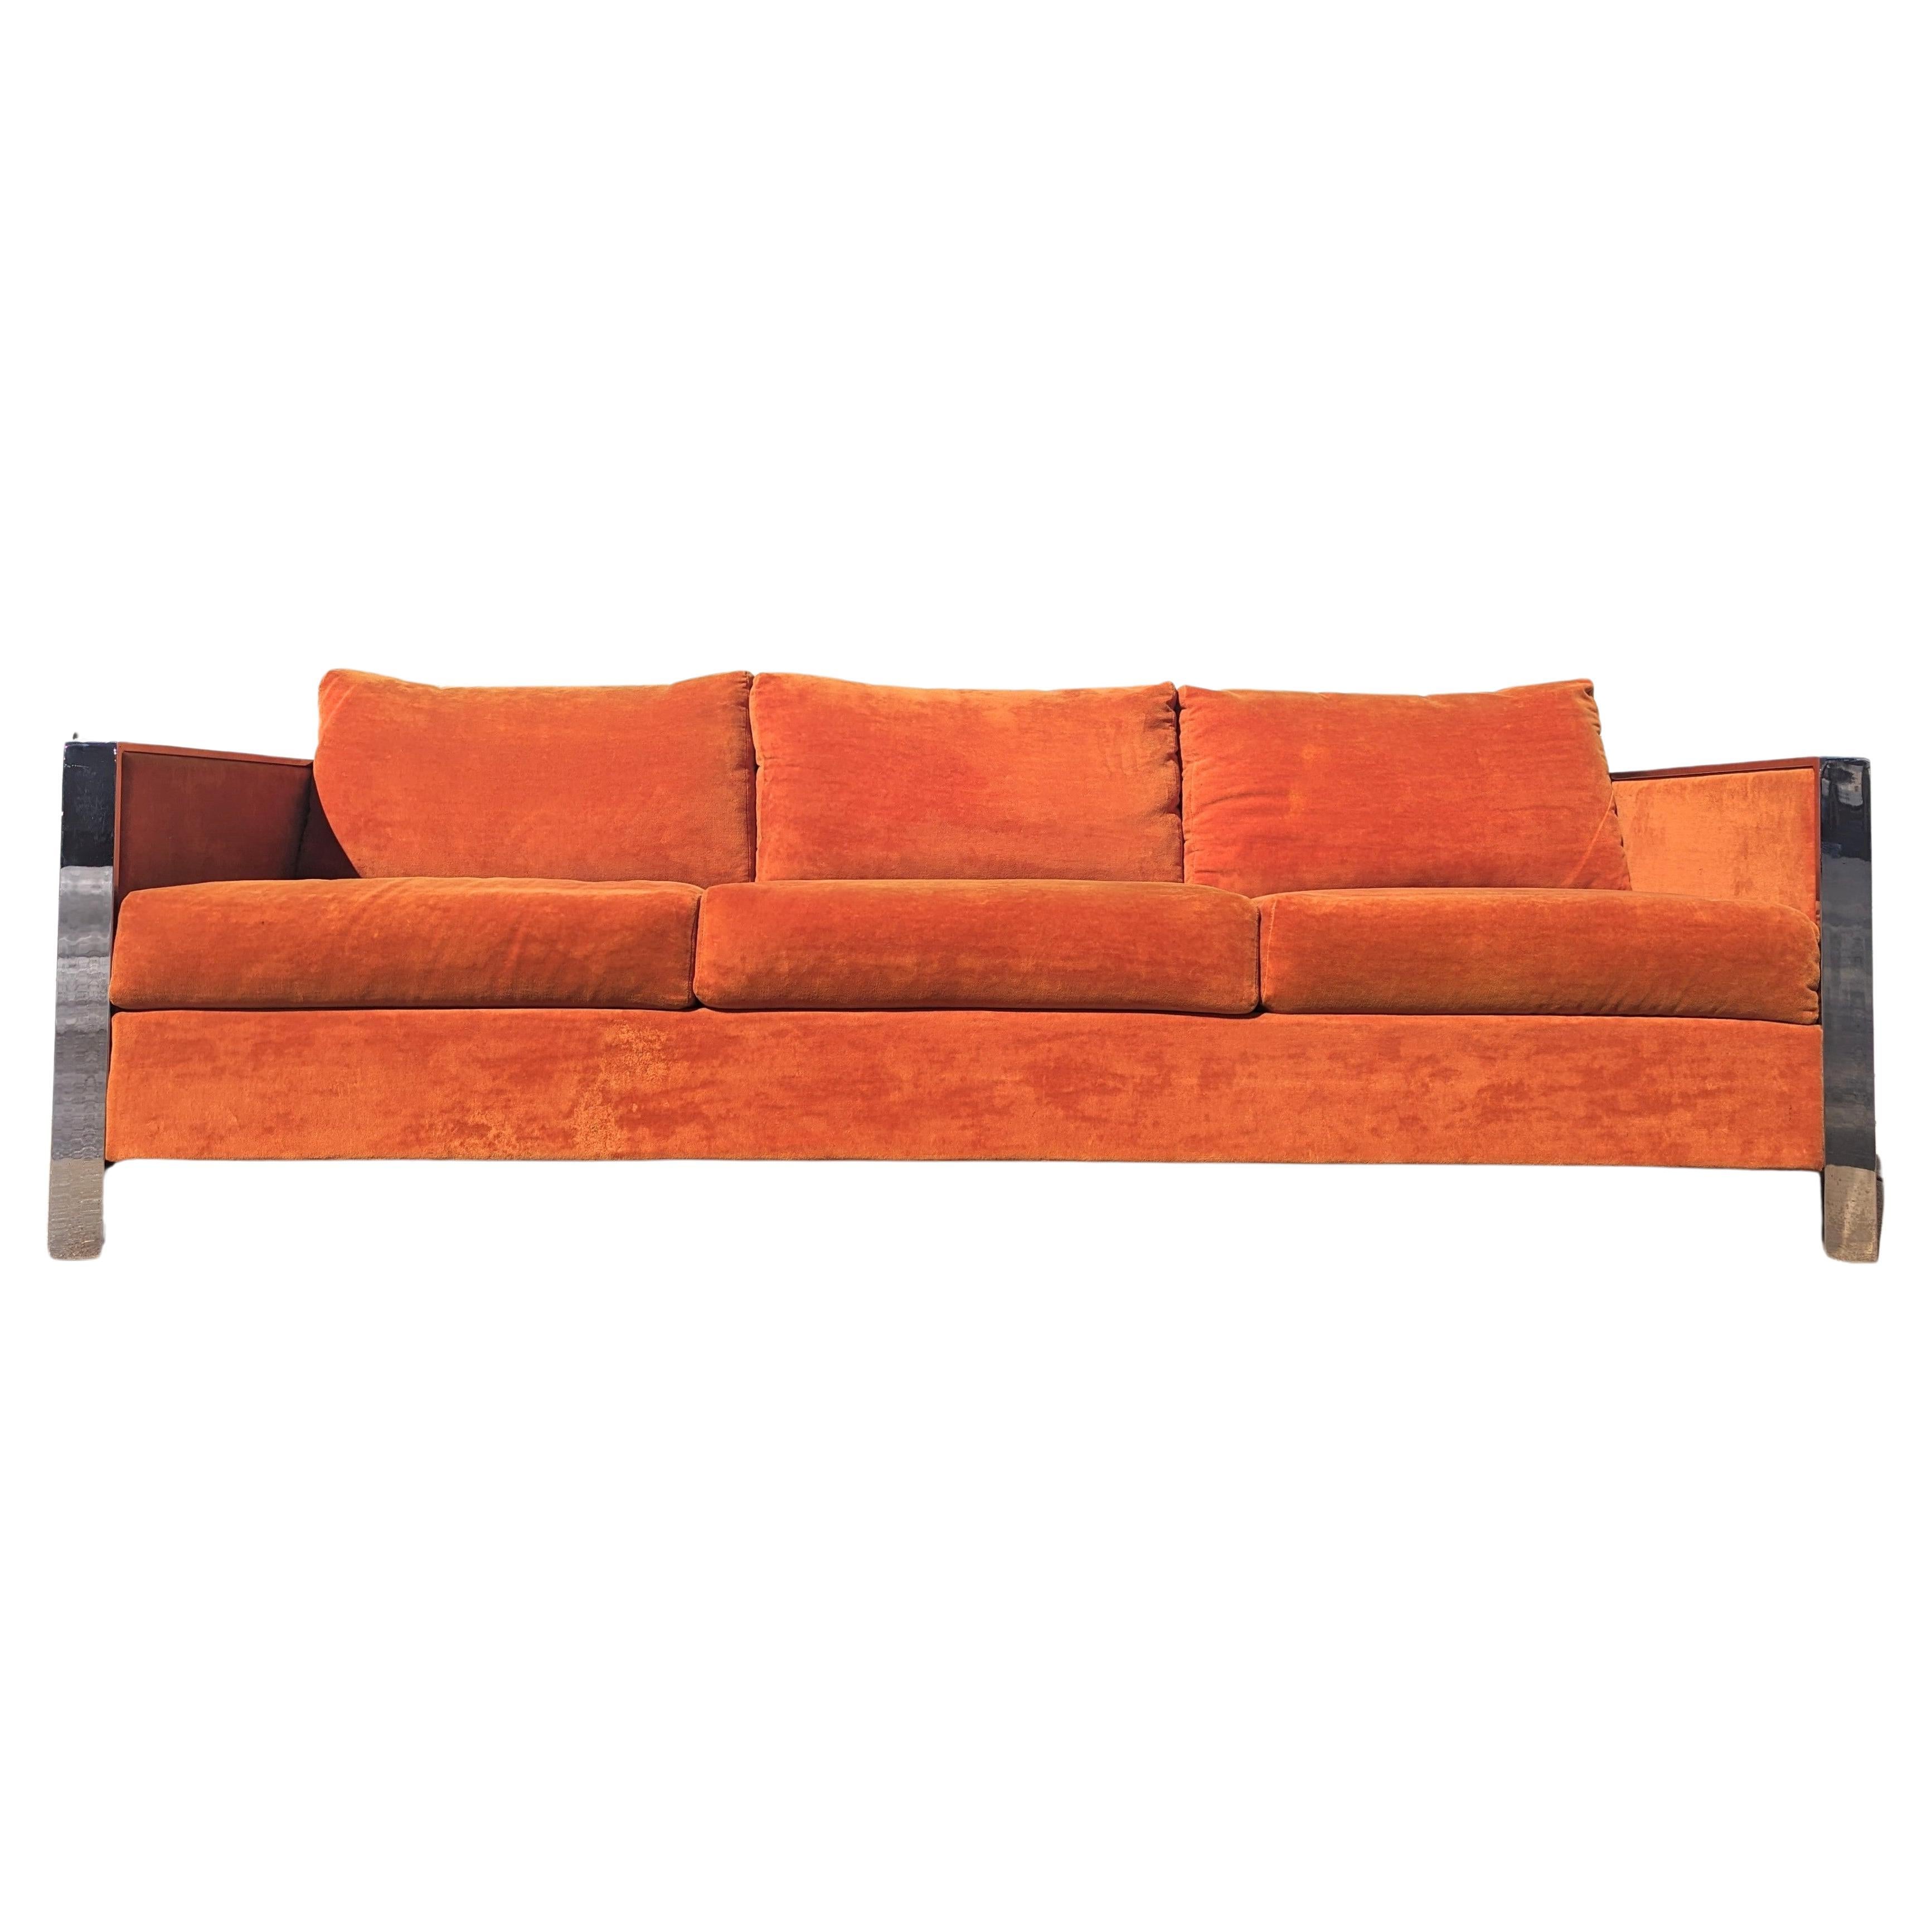 Beautiful, unique Adrian Pearsall for Comfort Designs stainless steel, cork, and velvet sofa.  I would consider this in above average condition. Stainless steel frame has very little wear. Cork is almost all intact with very little wear. Sofa